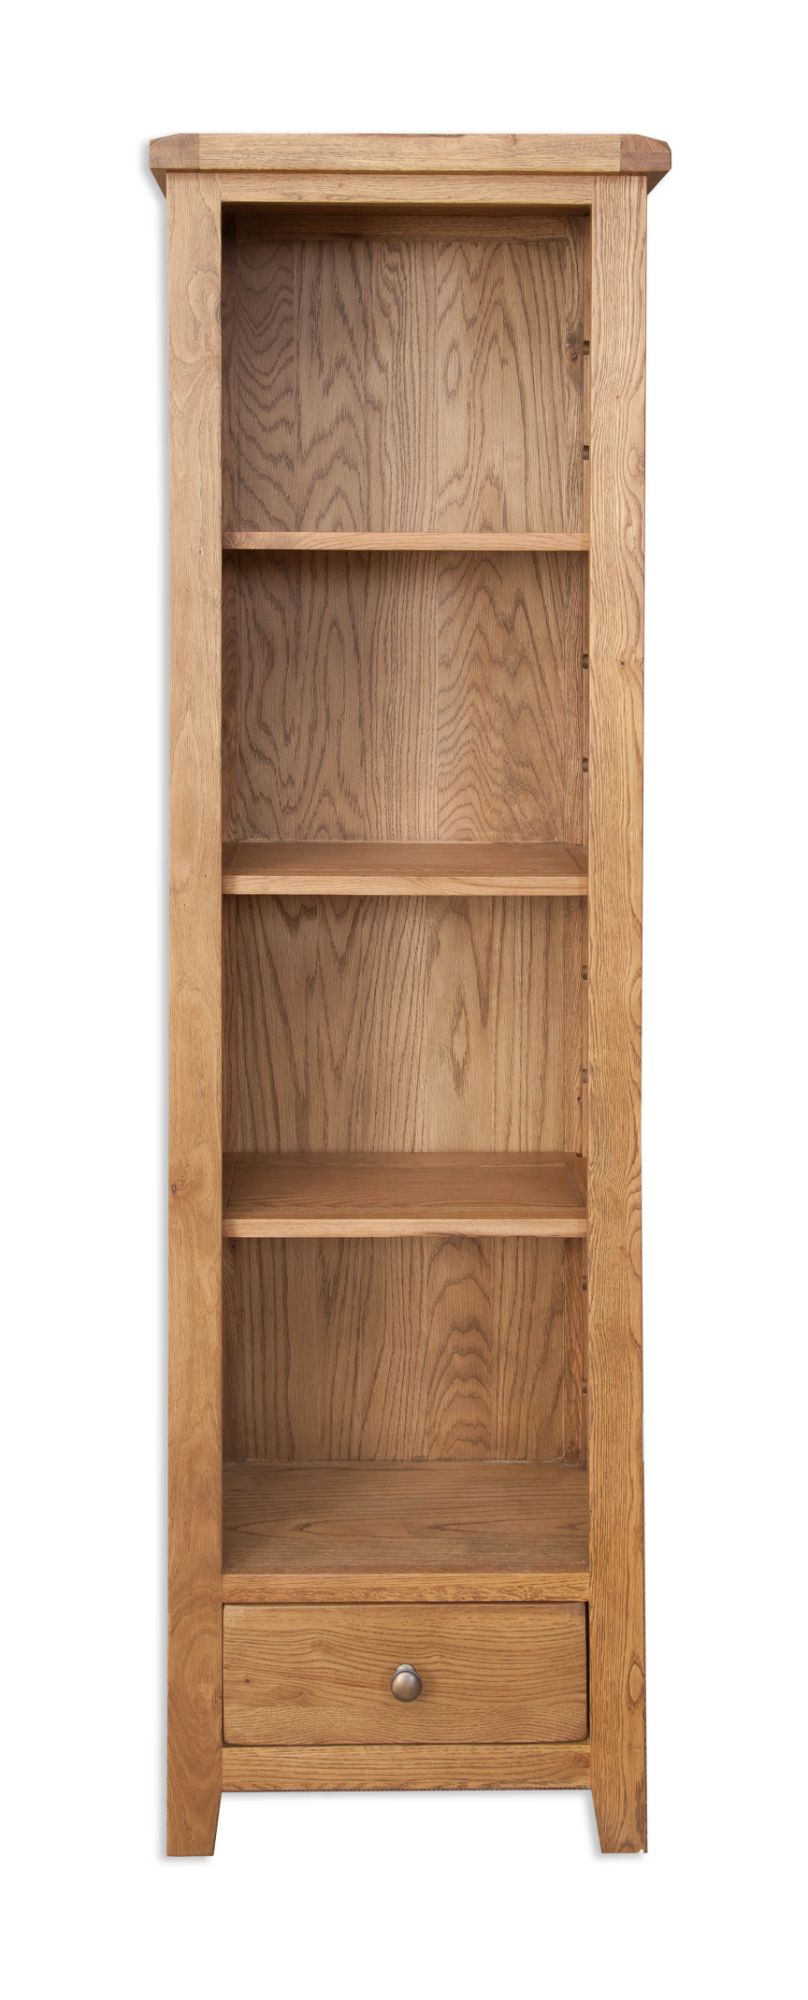 Monmouth Country Oak Slim Bookcase